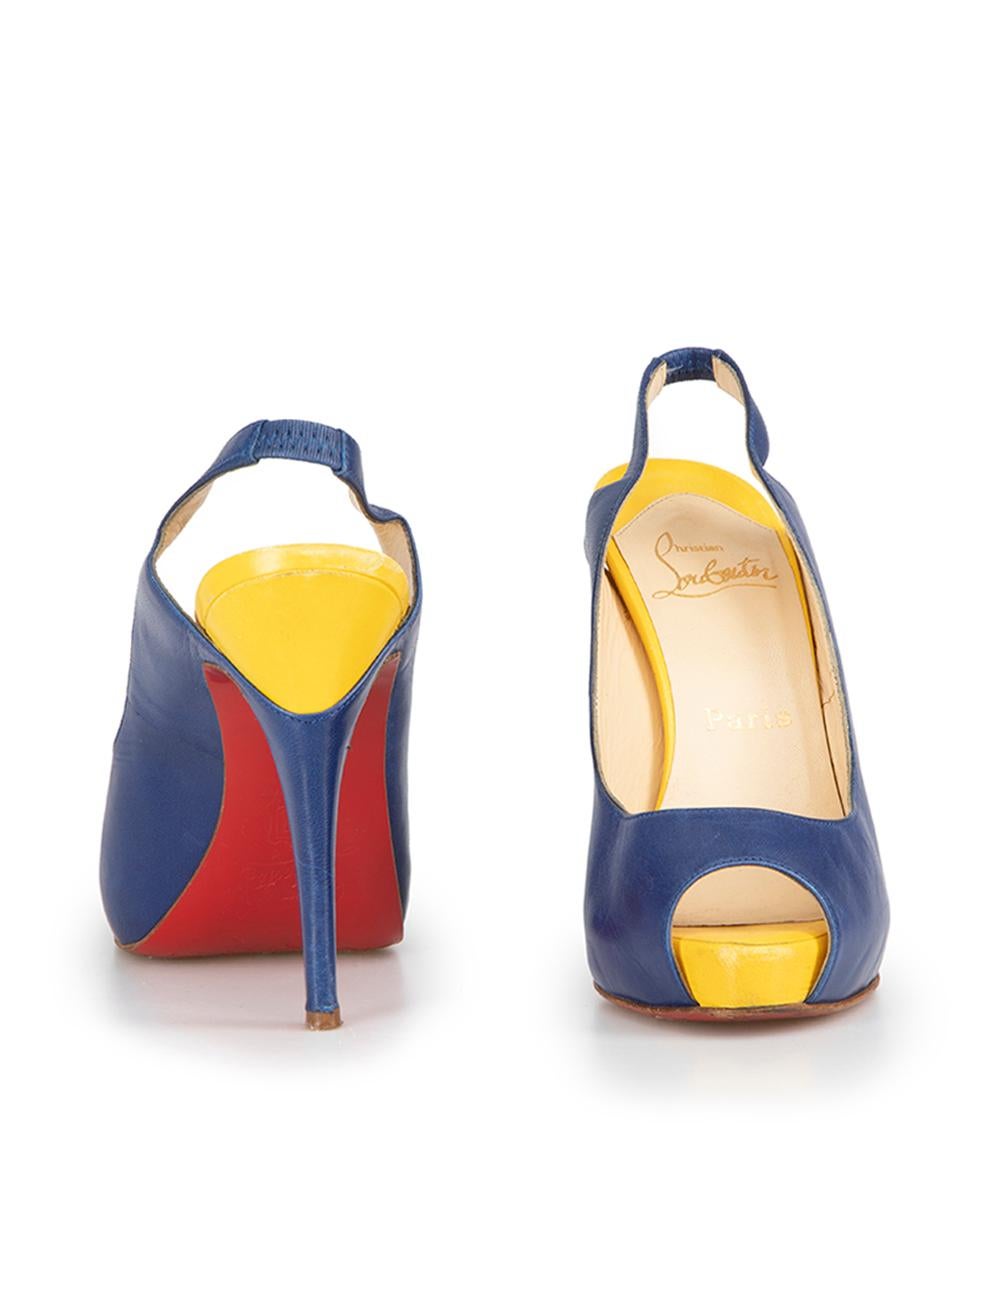 Christian Louboutin Women's Blue Leather Colour Block Slingback Heels In Good Condition For Sale In London, GB